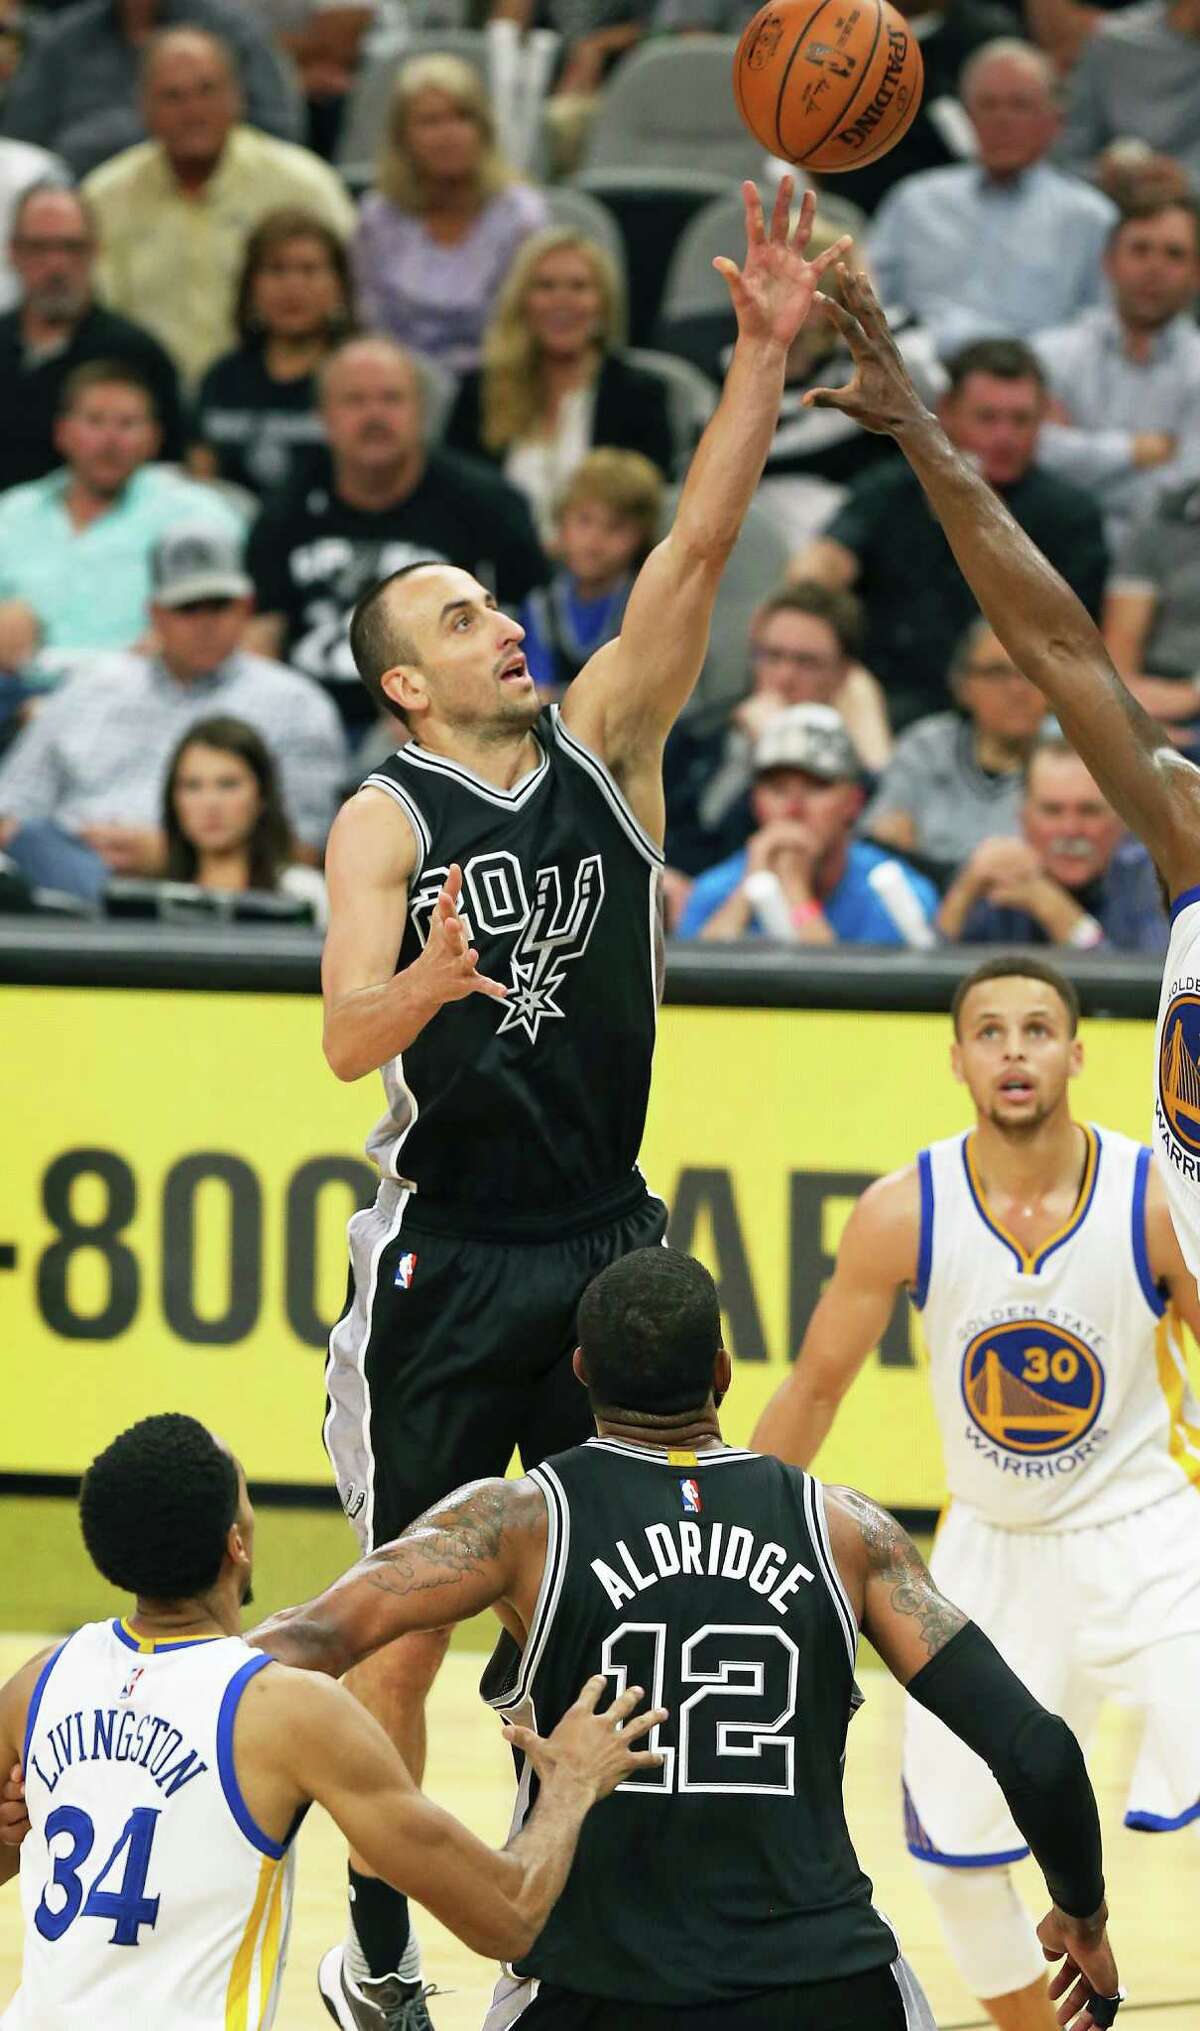 Manu Ginobili hoists a jumper in the second half as the Spurs host Golden State at the AT&T Center on April 10, 2016.